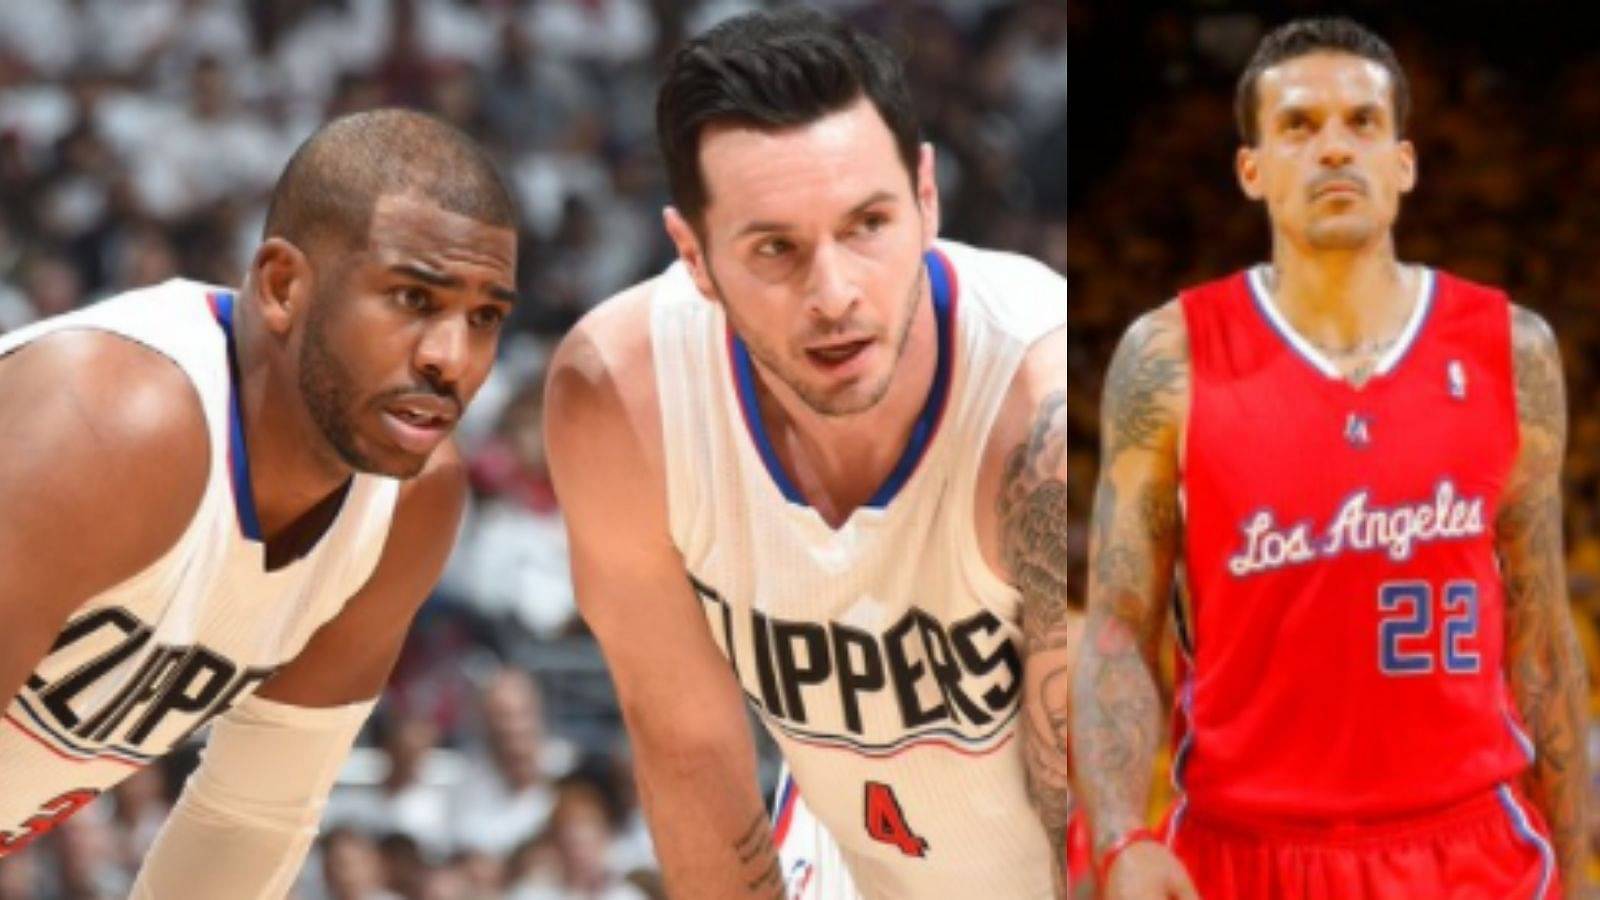 "Chris Paul is an acquired taste": Former Clippers teammates Matt Barnes and JJ Redick discuss being CP3's teammate as well as his long-illustrious career